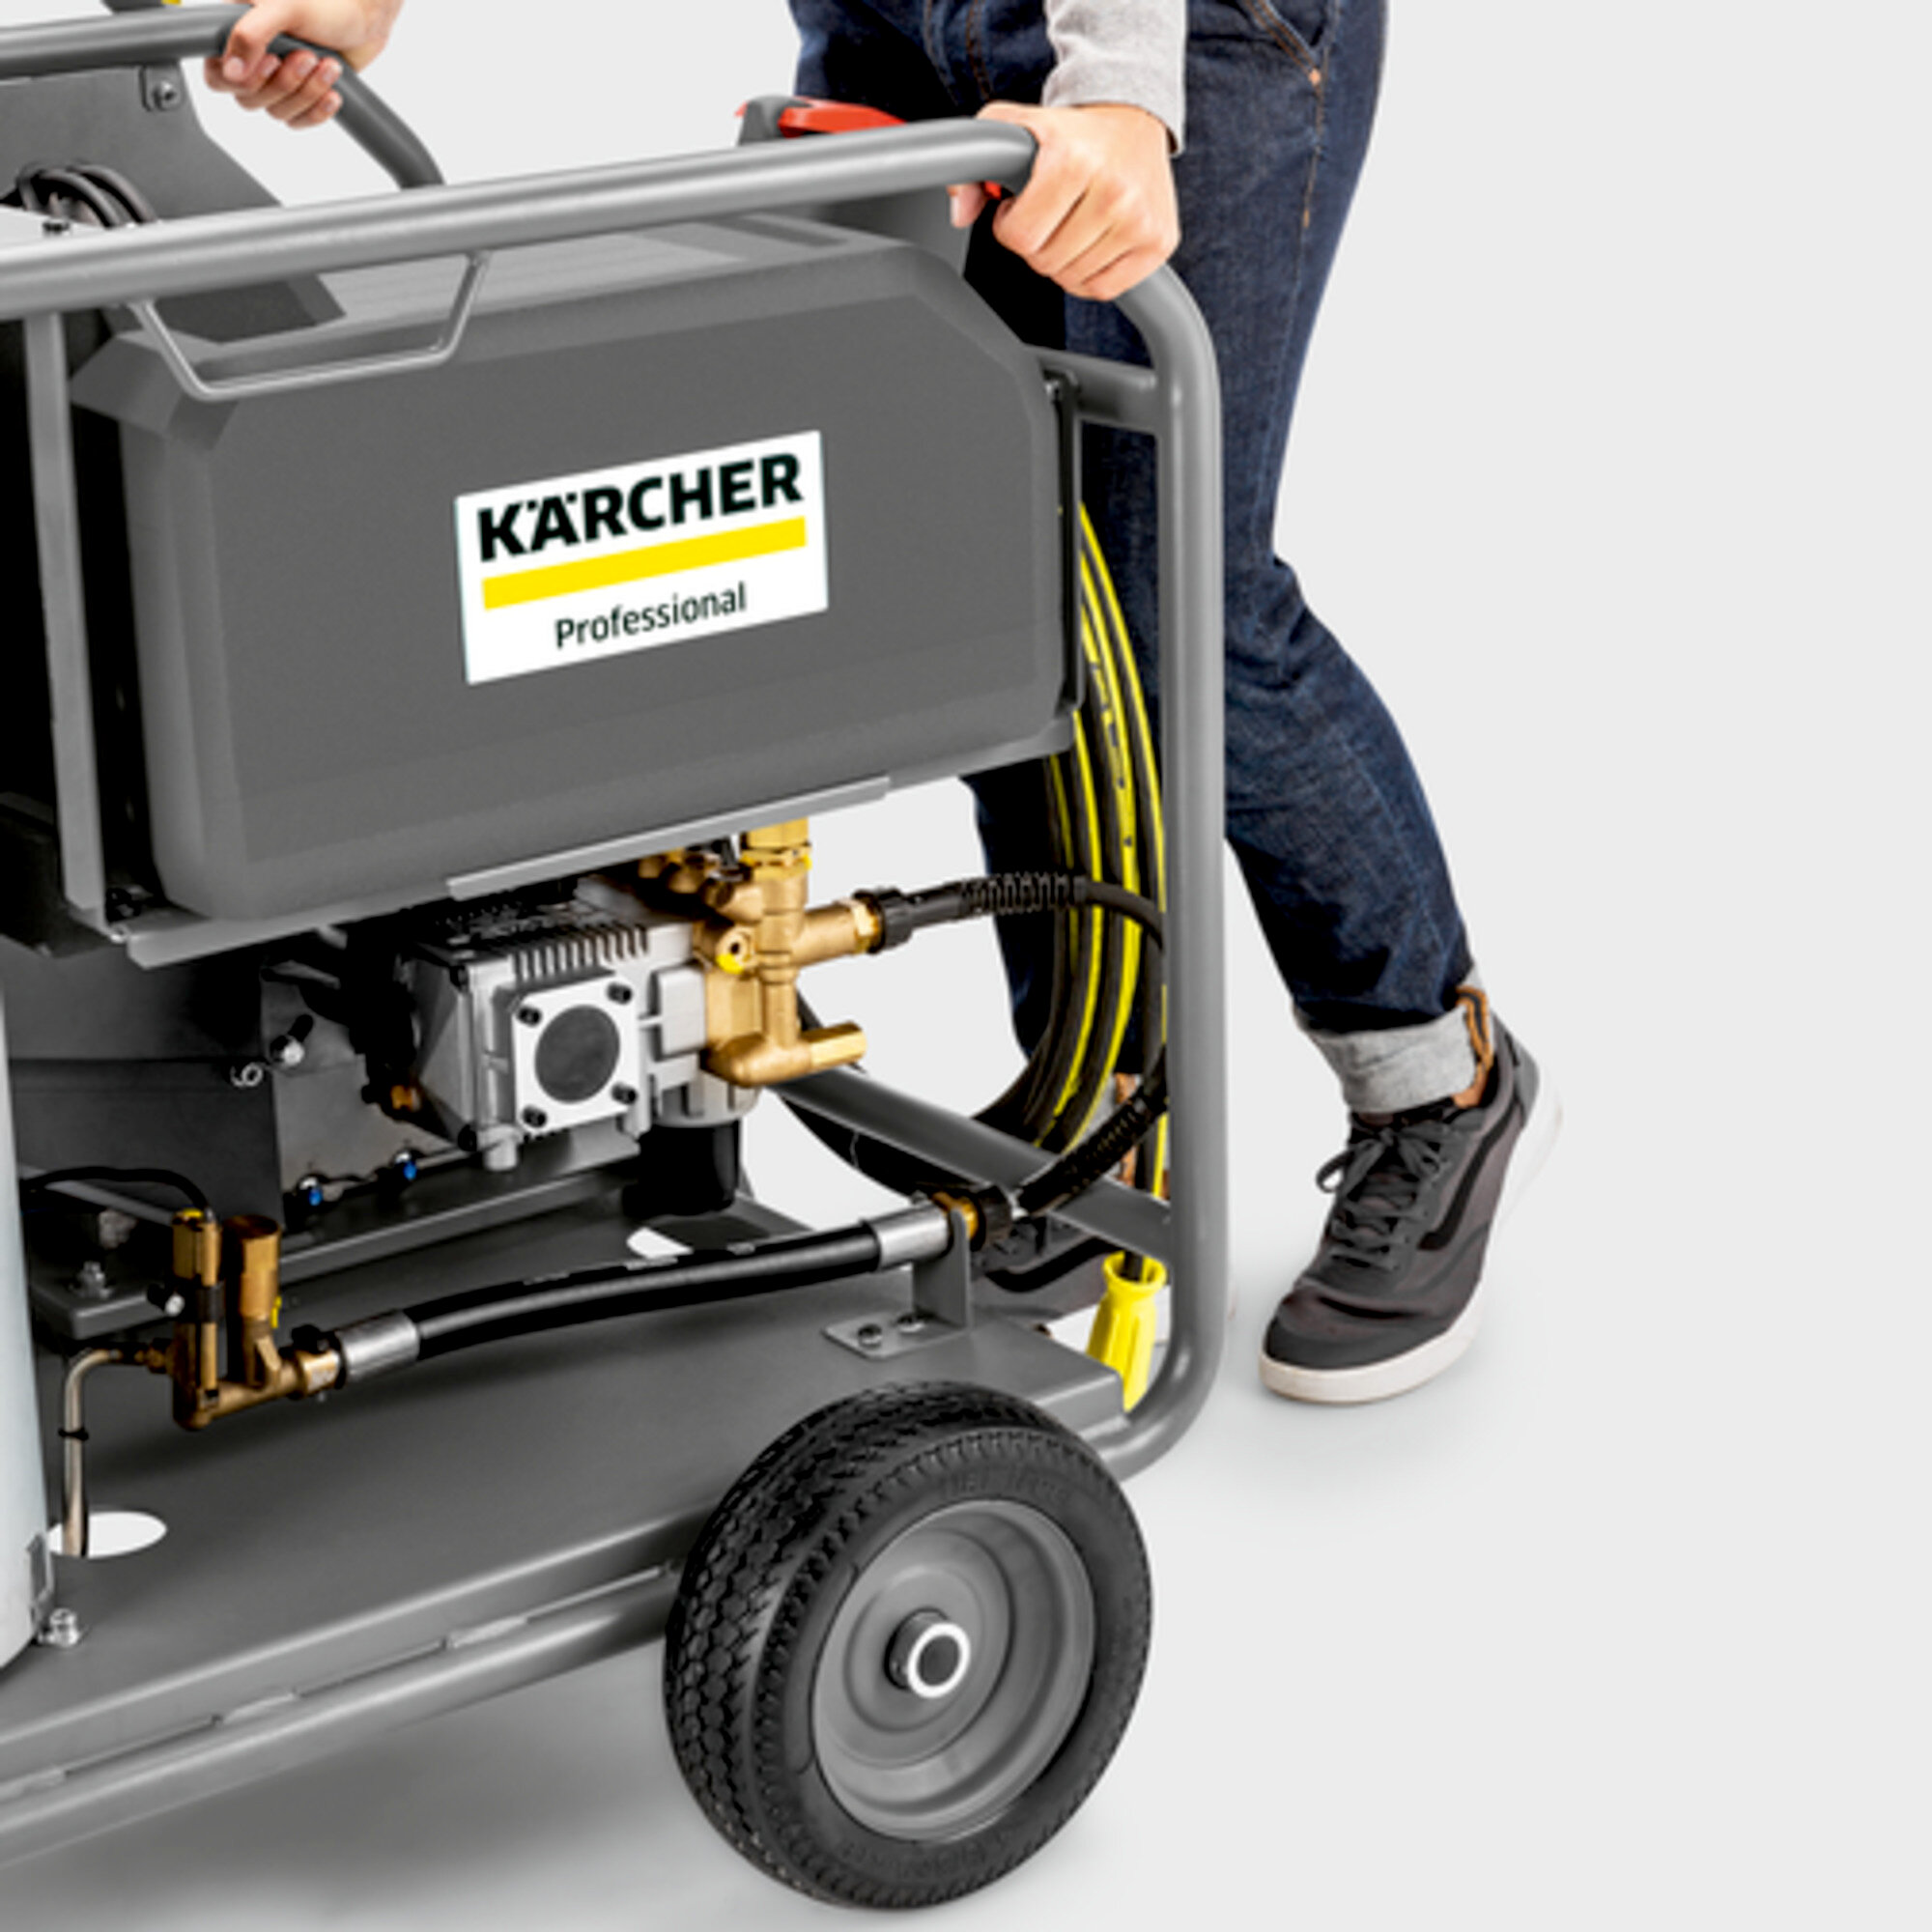 High-pressure washer HDS 8/20 De: Outstanding mobility